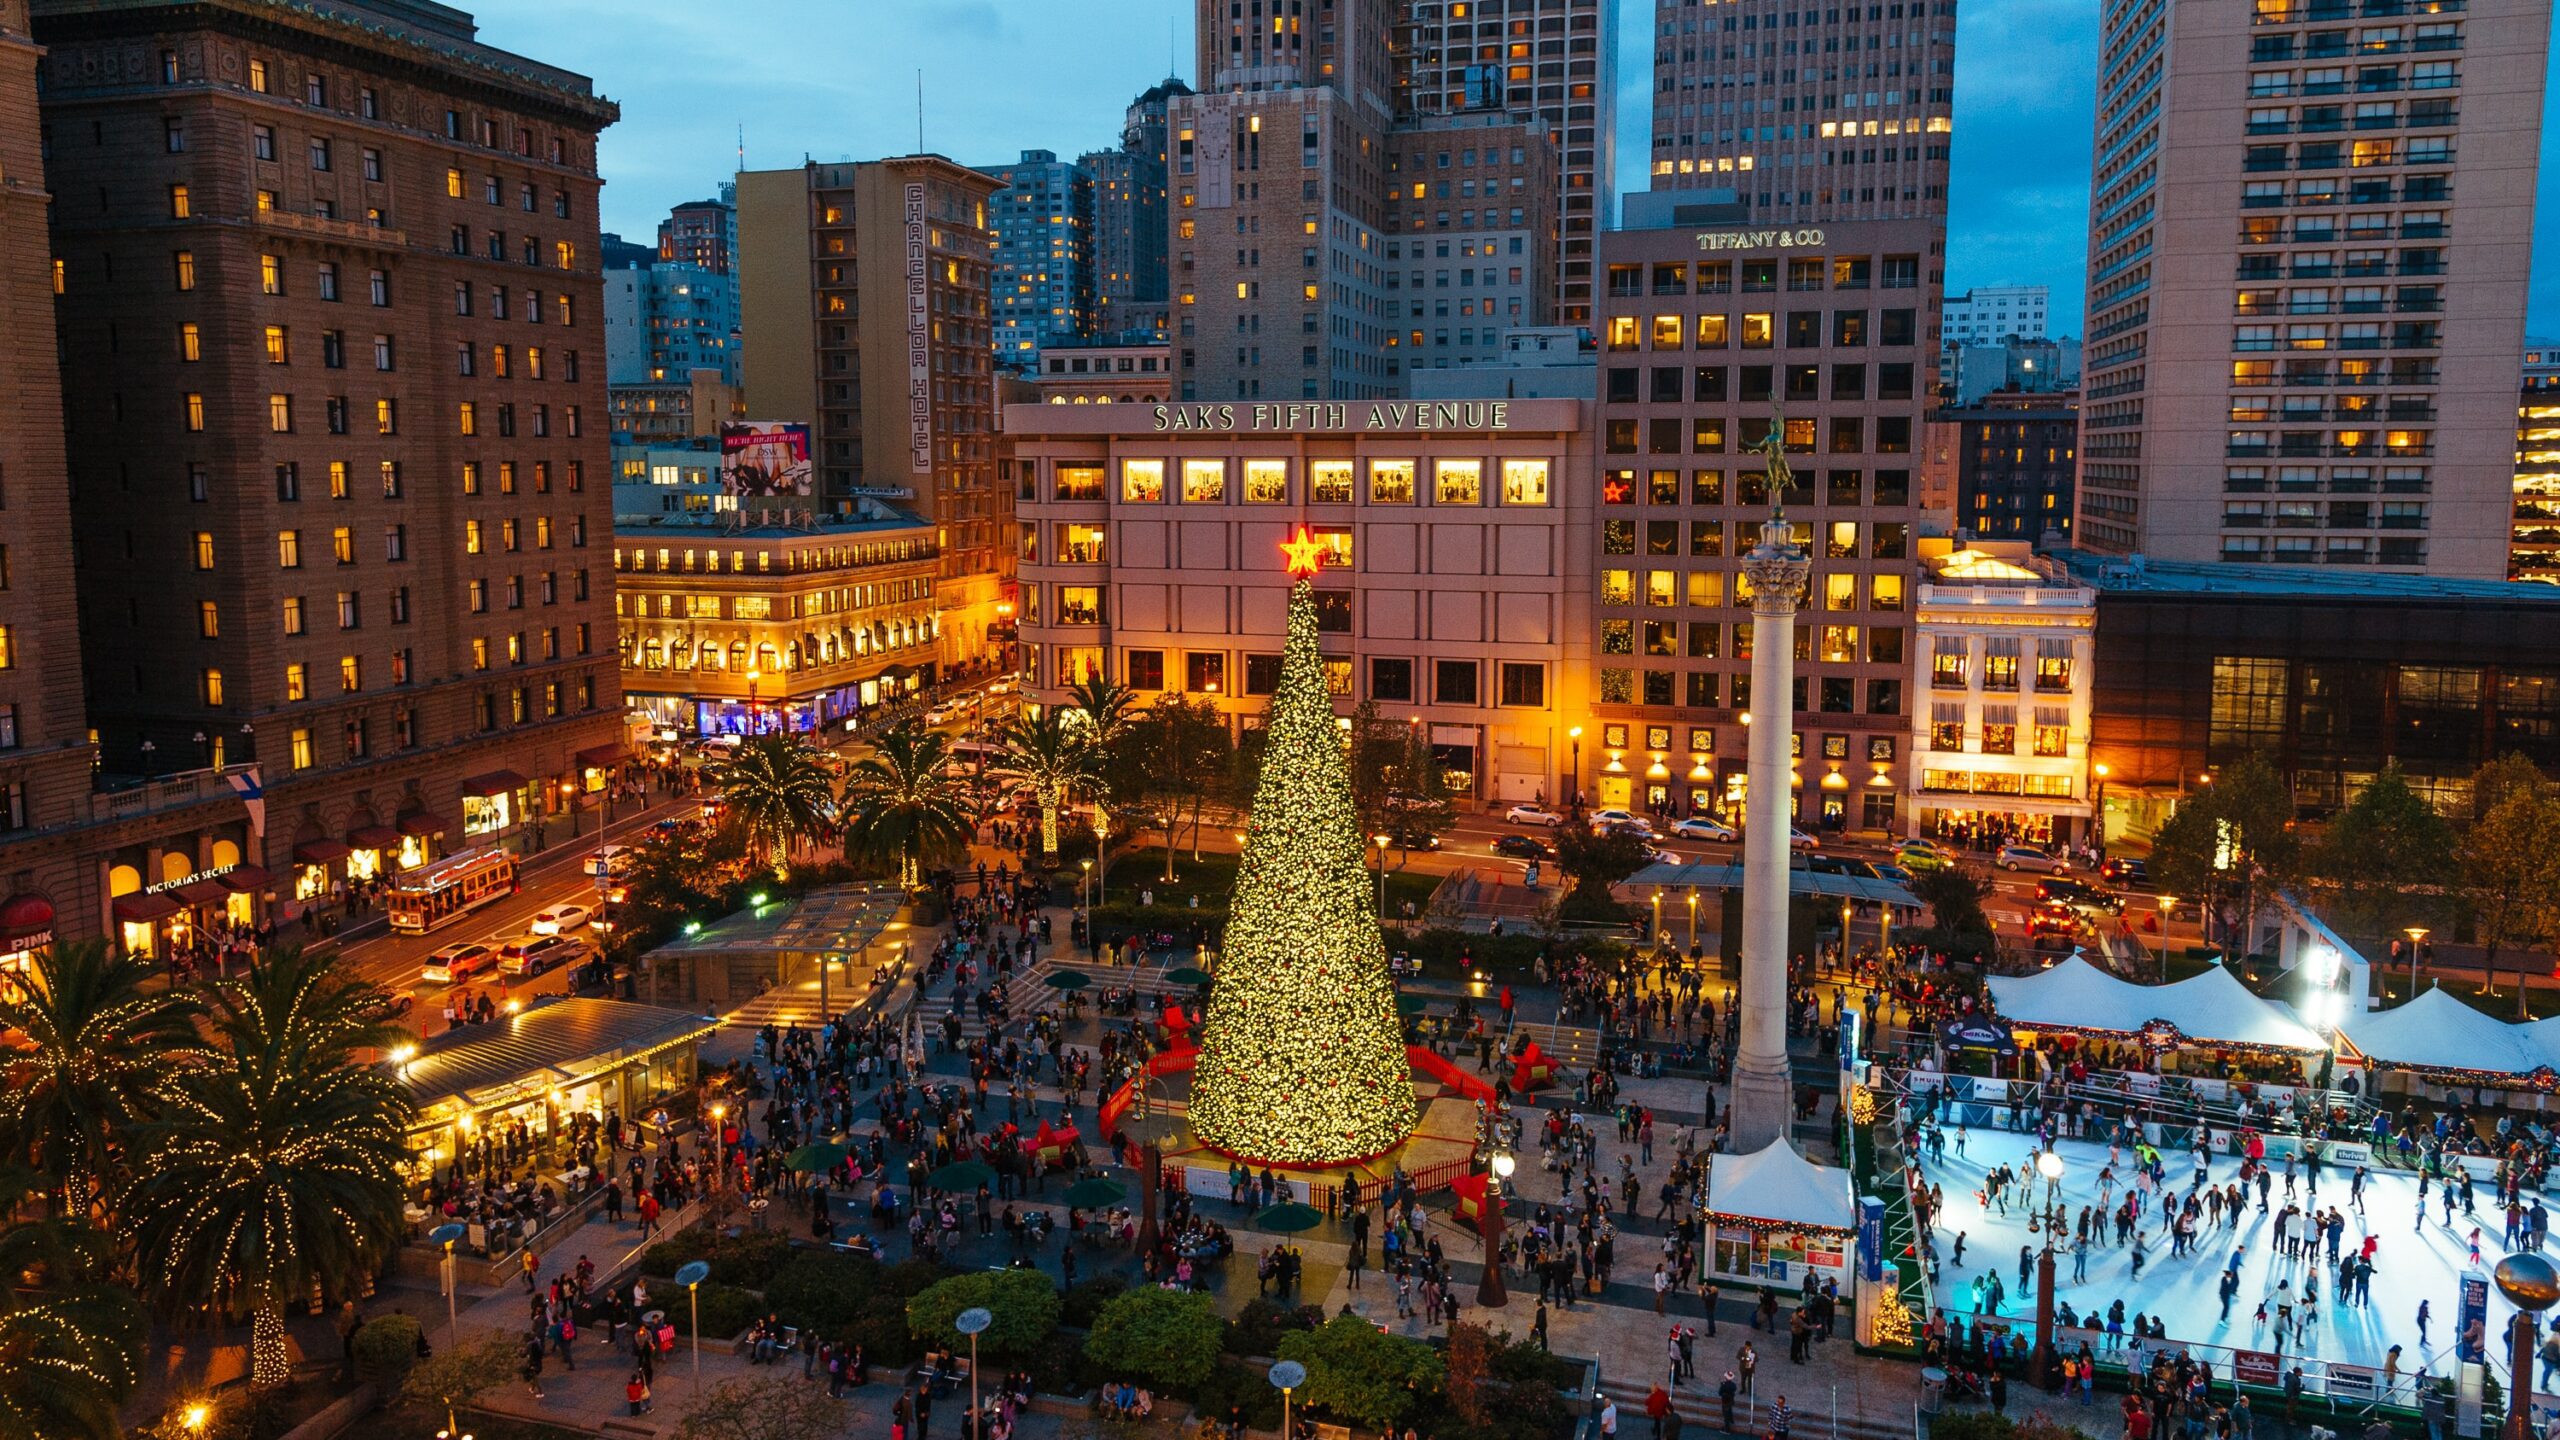 Union Square decorated for the holidays